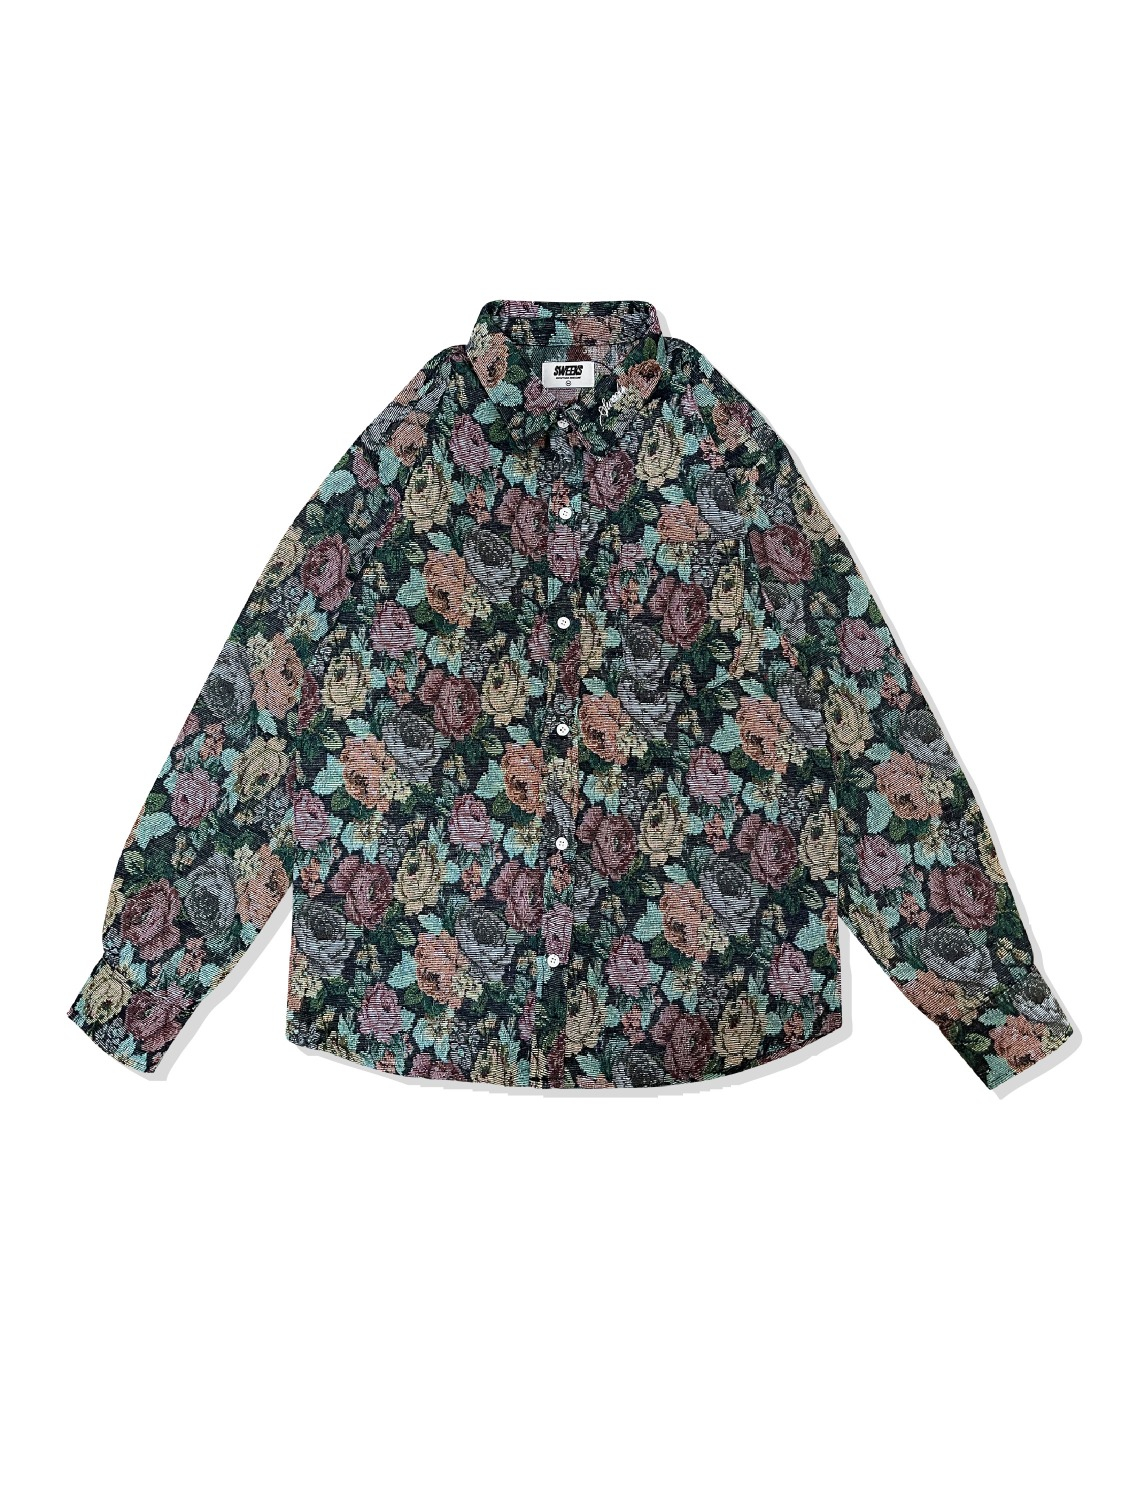 SW Floral Shirt (Night)